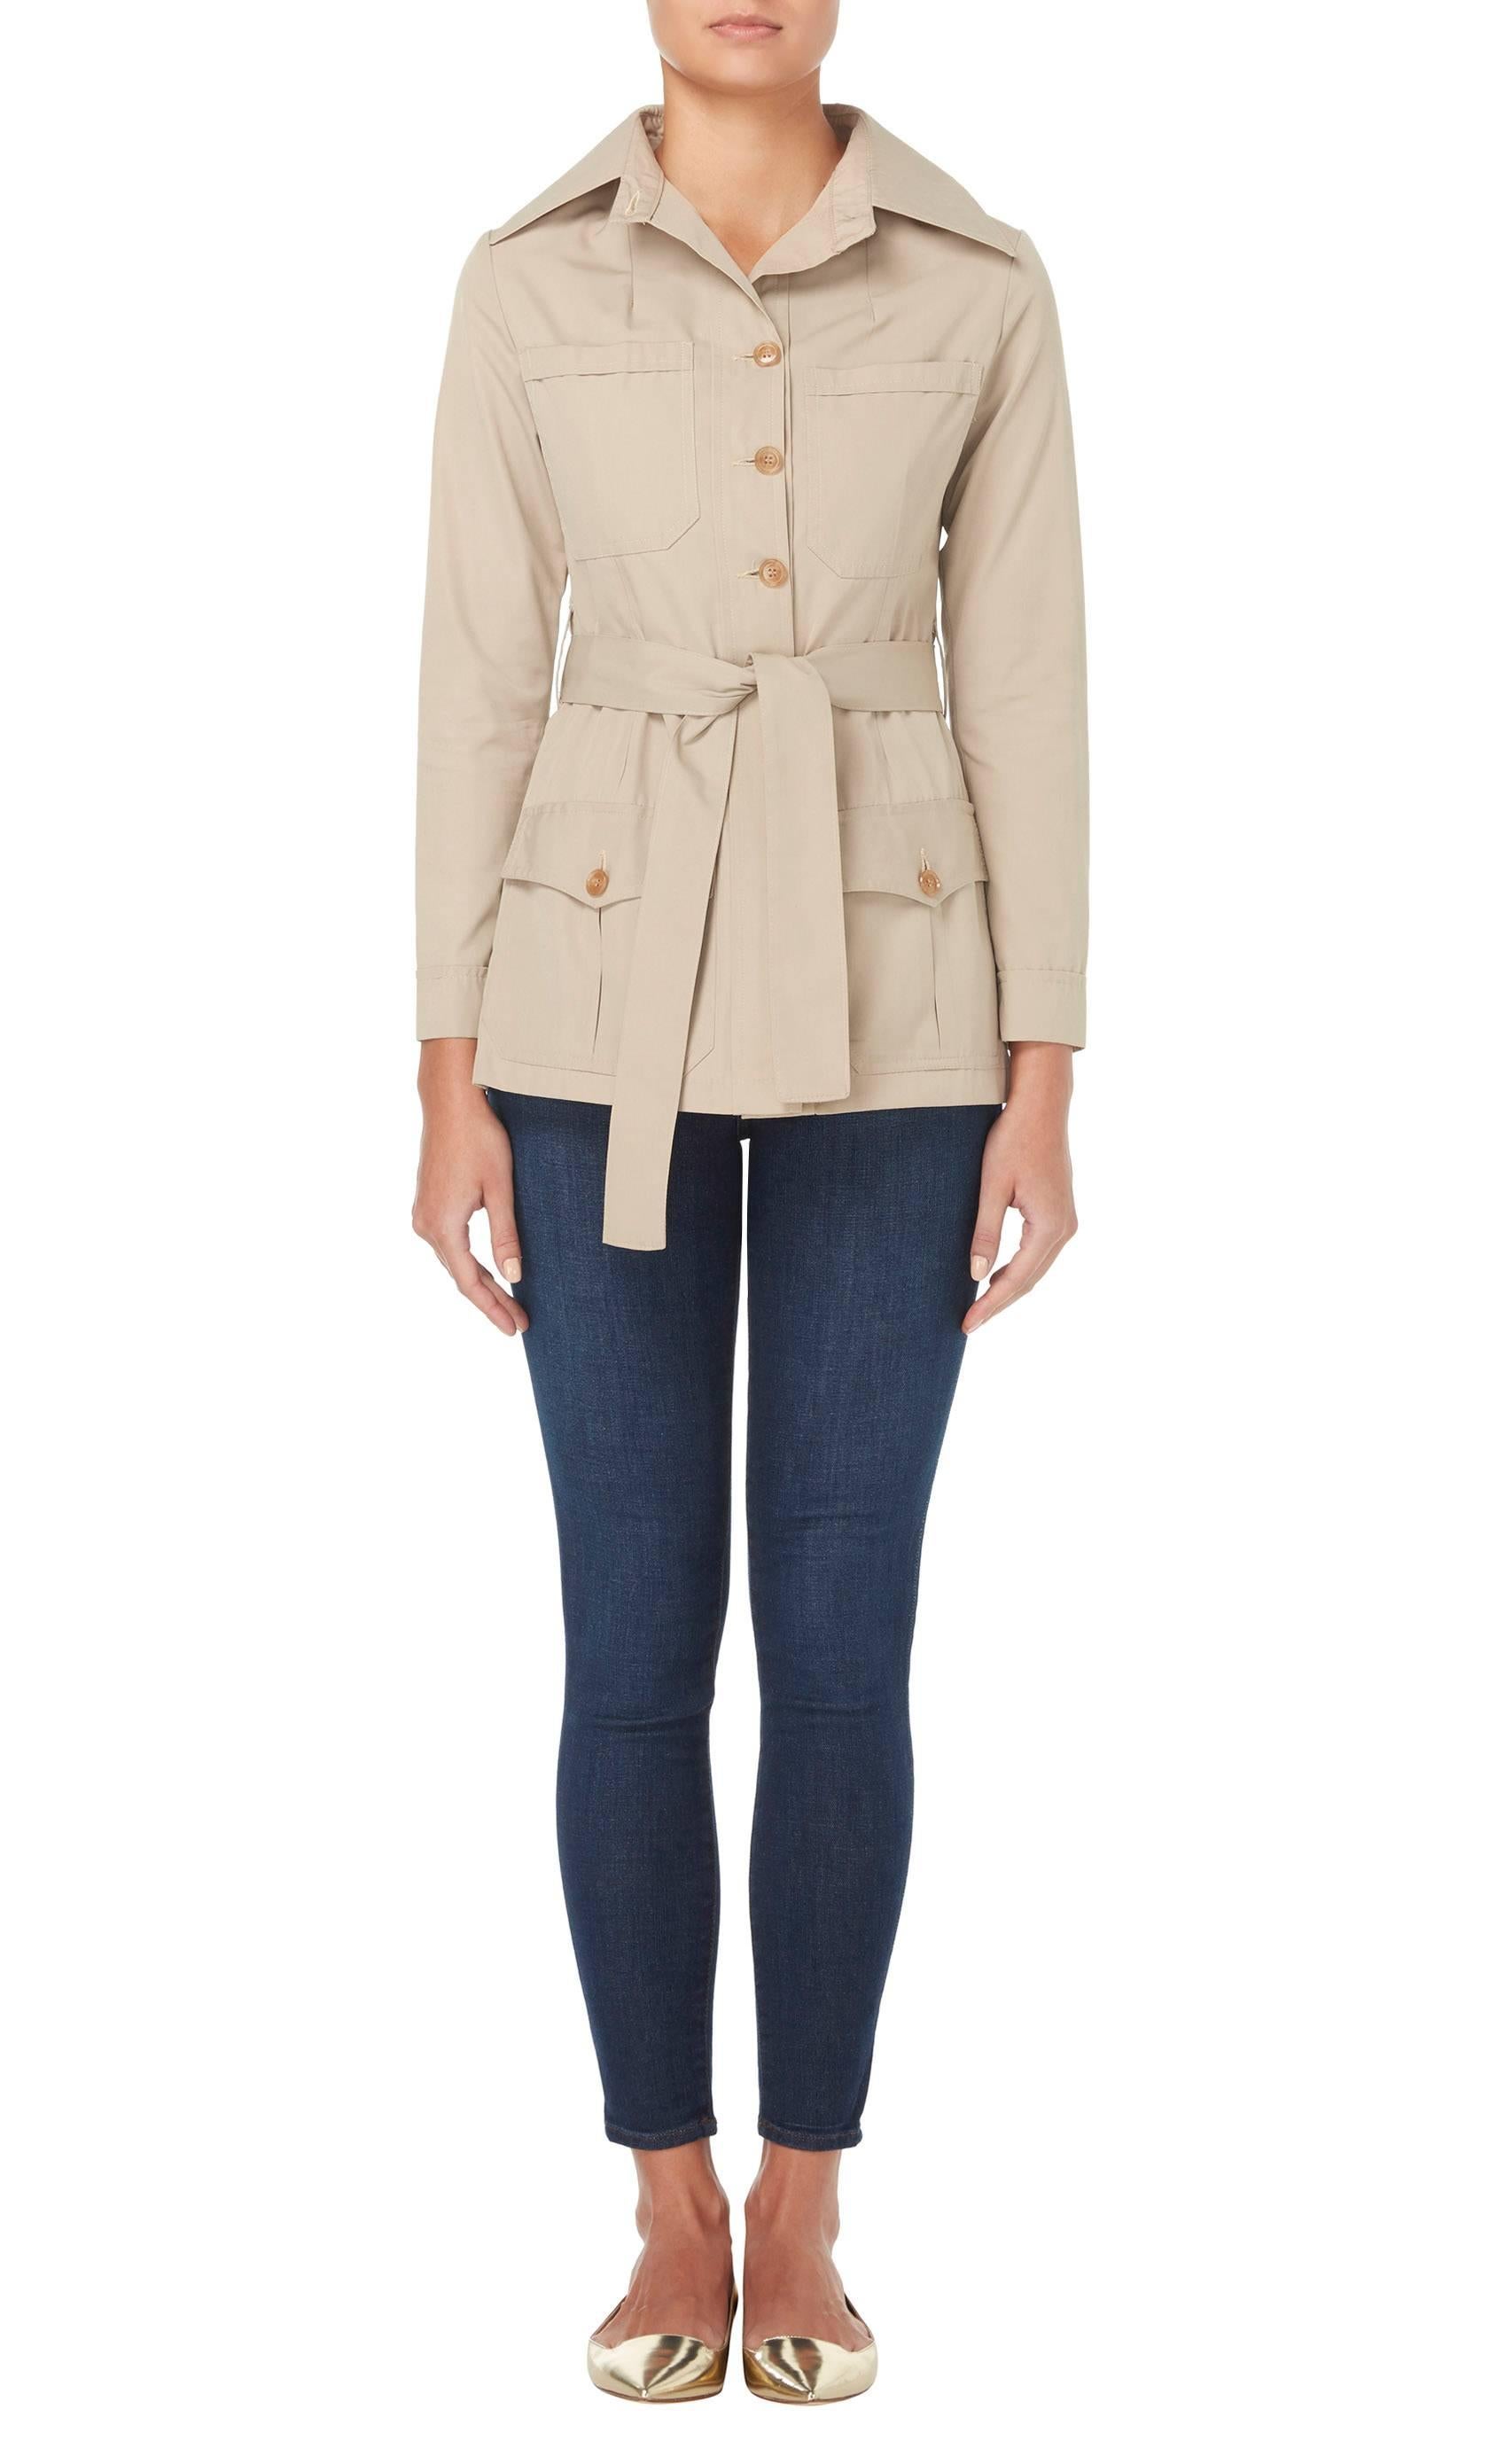 A great piece for everyday, this Ossie Clark safari style jacket will look great worn with skinny jeans and sandals. Constructed in sand-coloured cotton, the jacket features an exaggerated collar and buttons fastening to the front. With a flattering